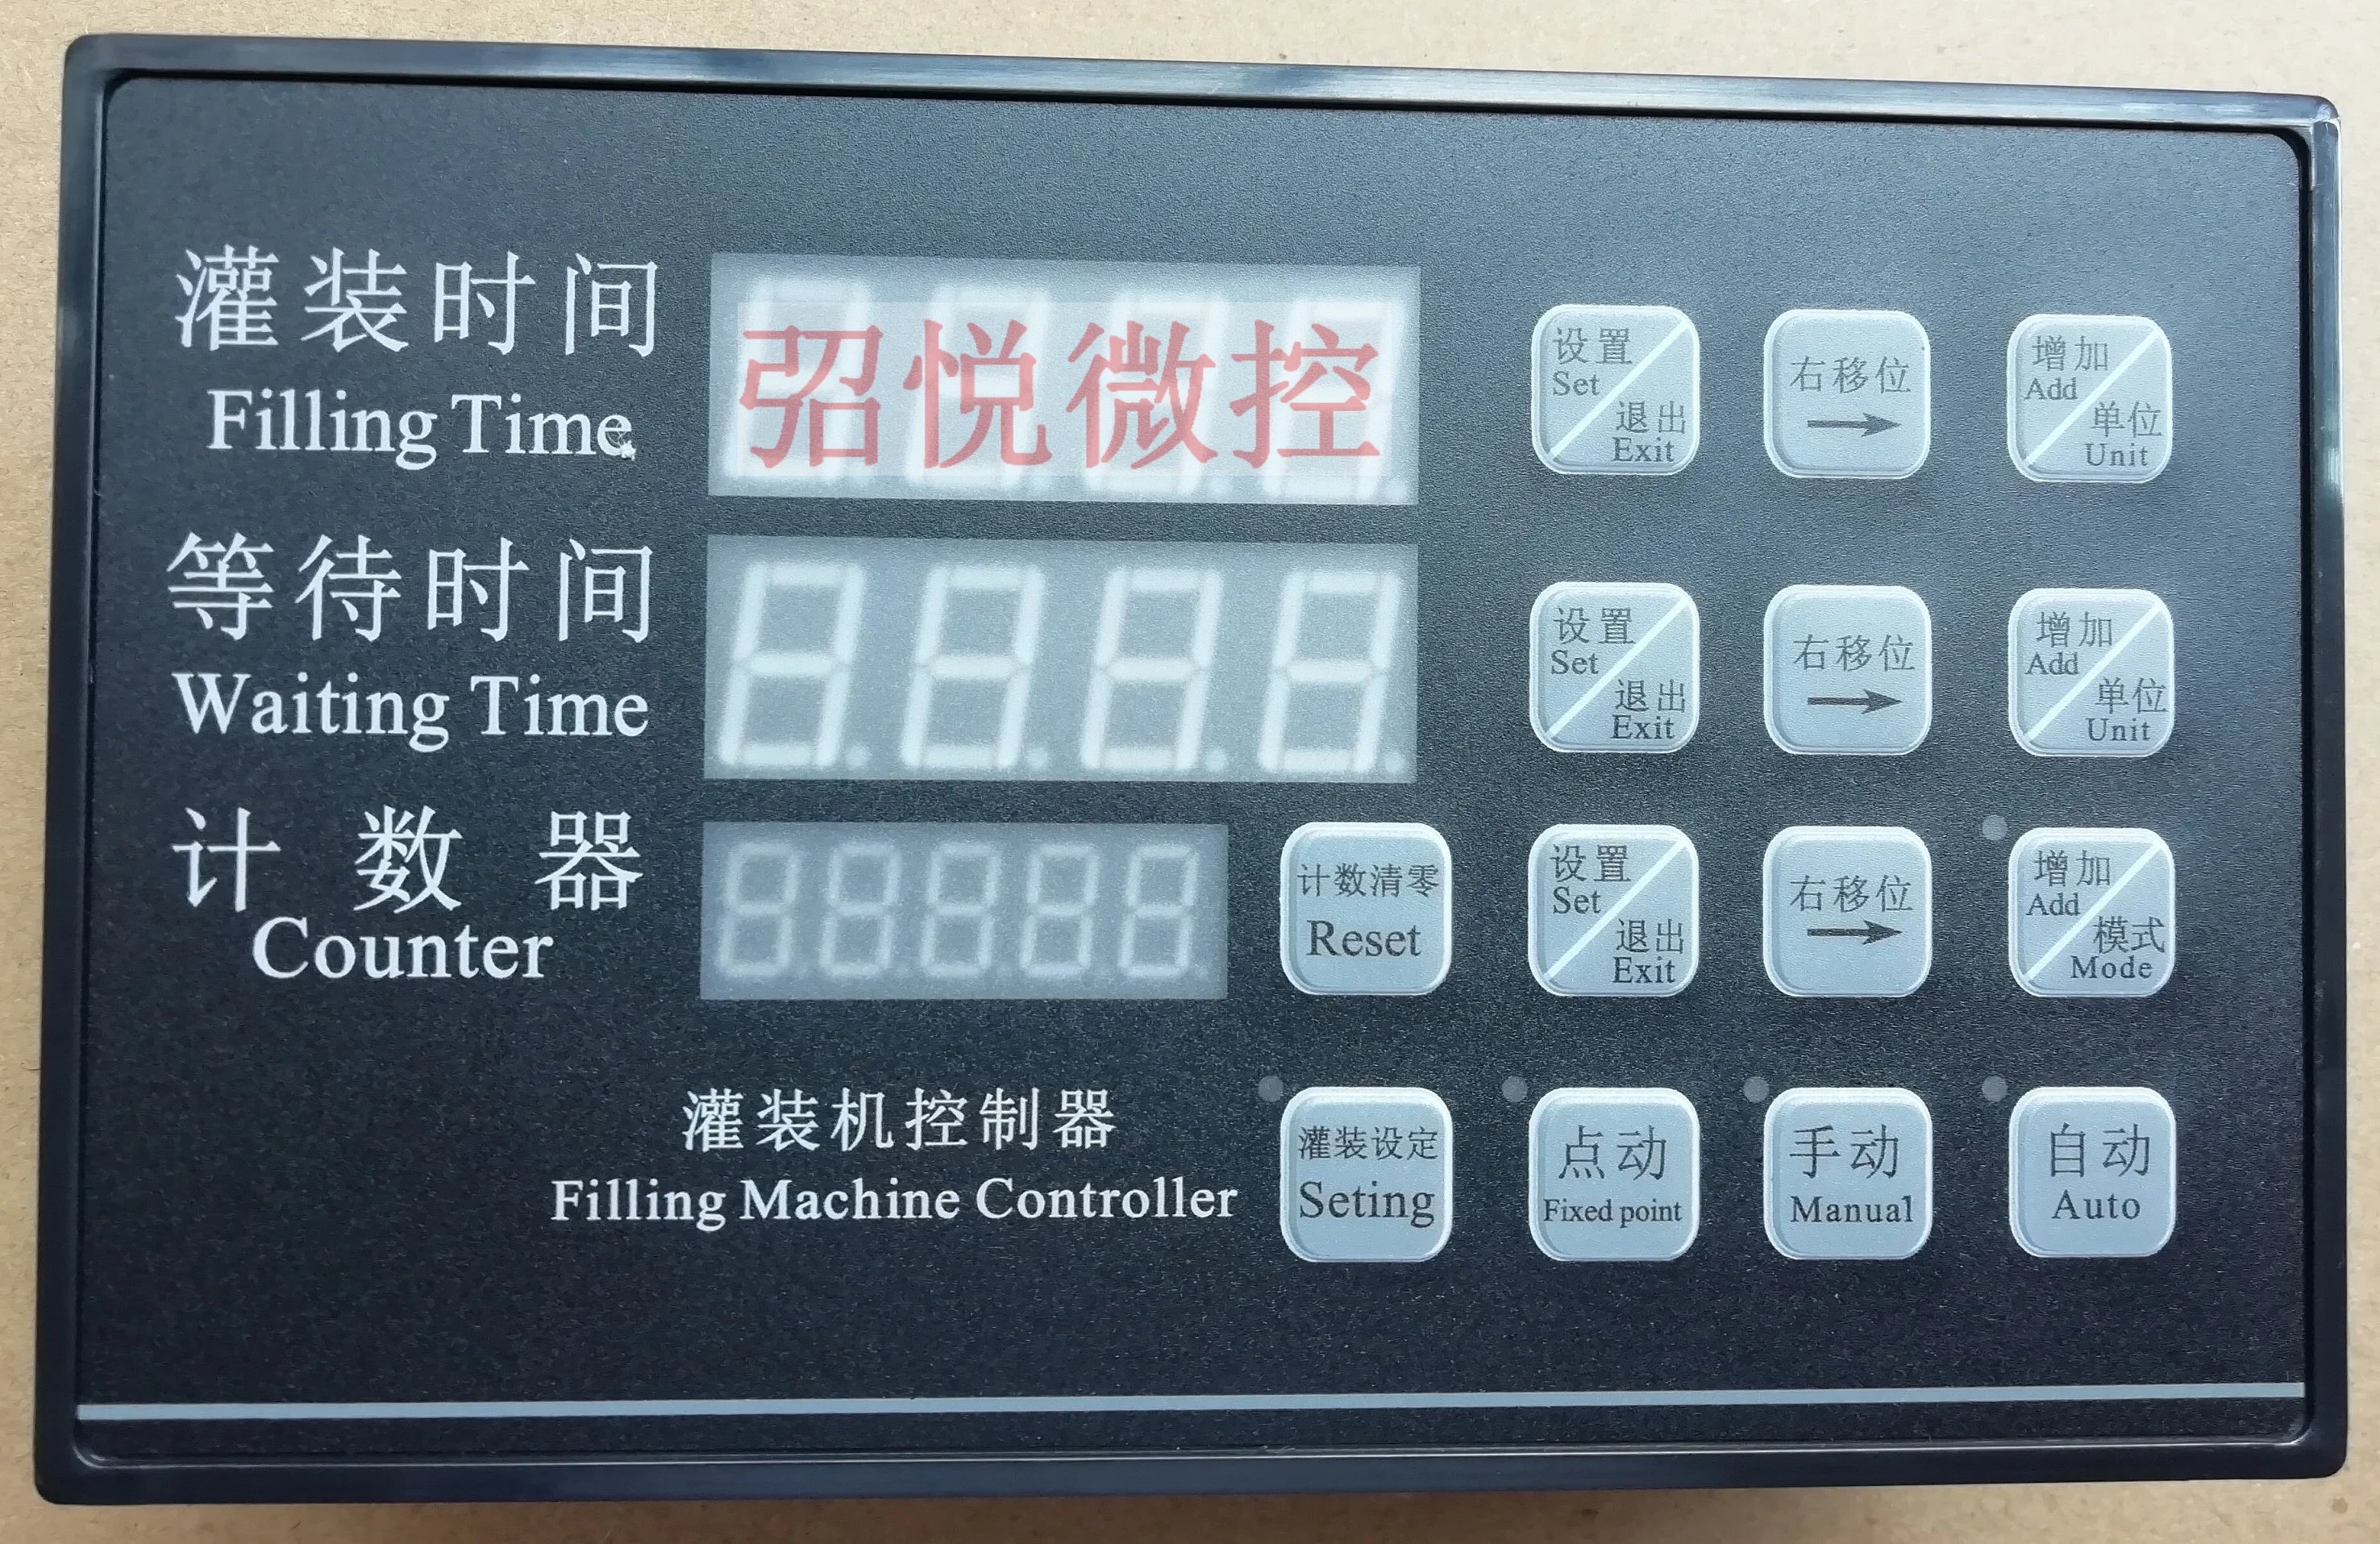 time-control-type-cy17220-filling-machine-controller-ac220v-filling-machine-accessories-time-control-liquid-quantity-meter